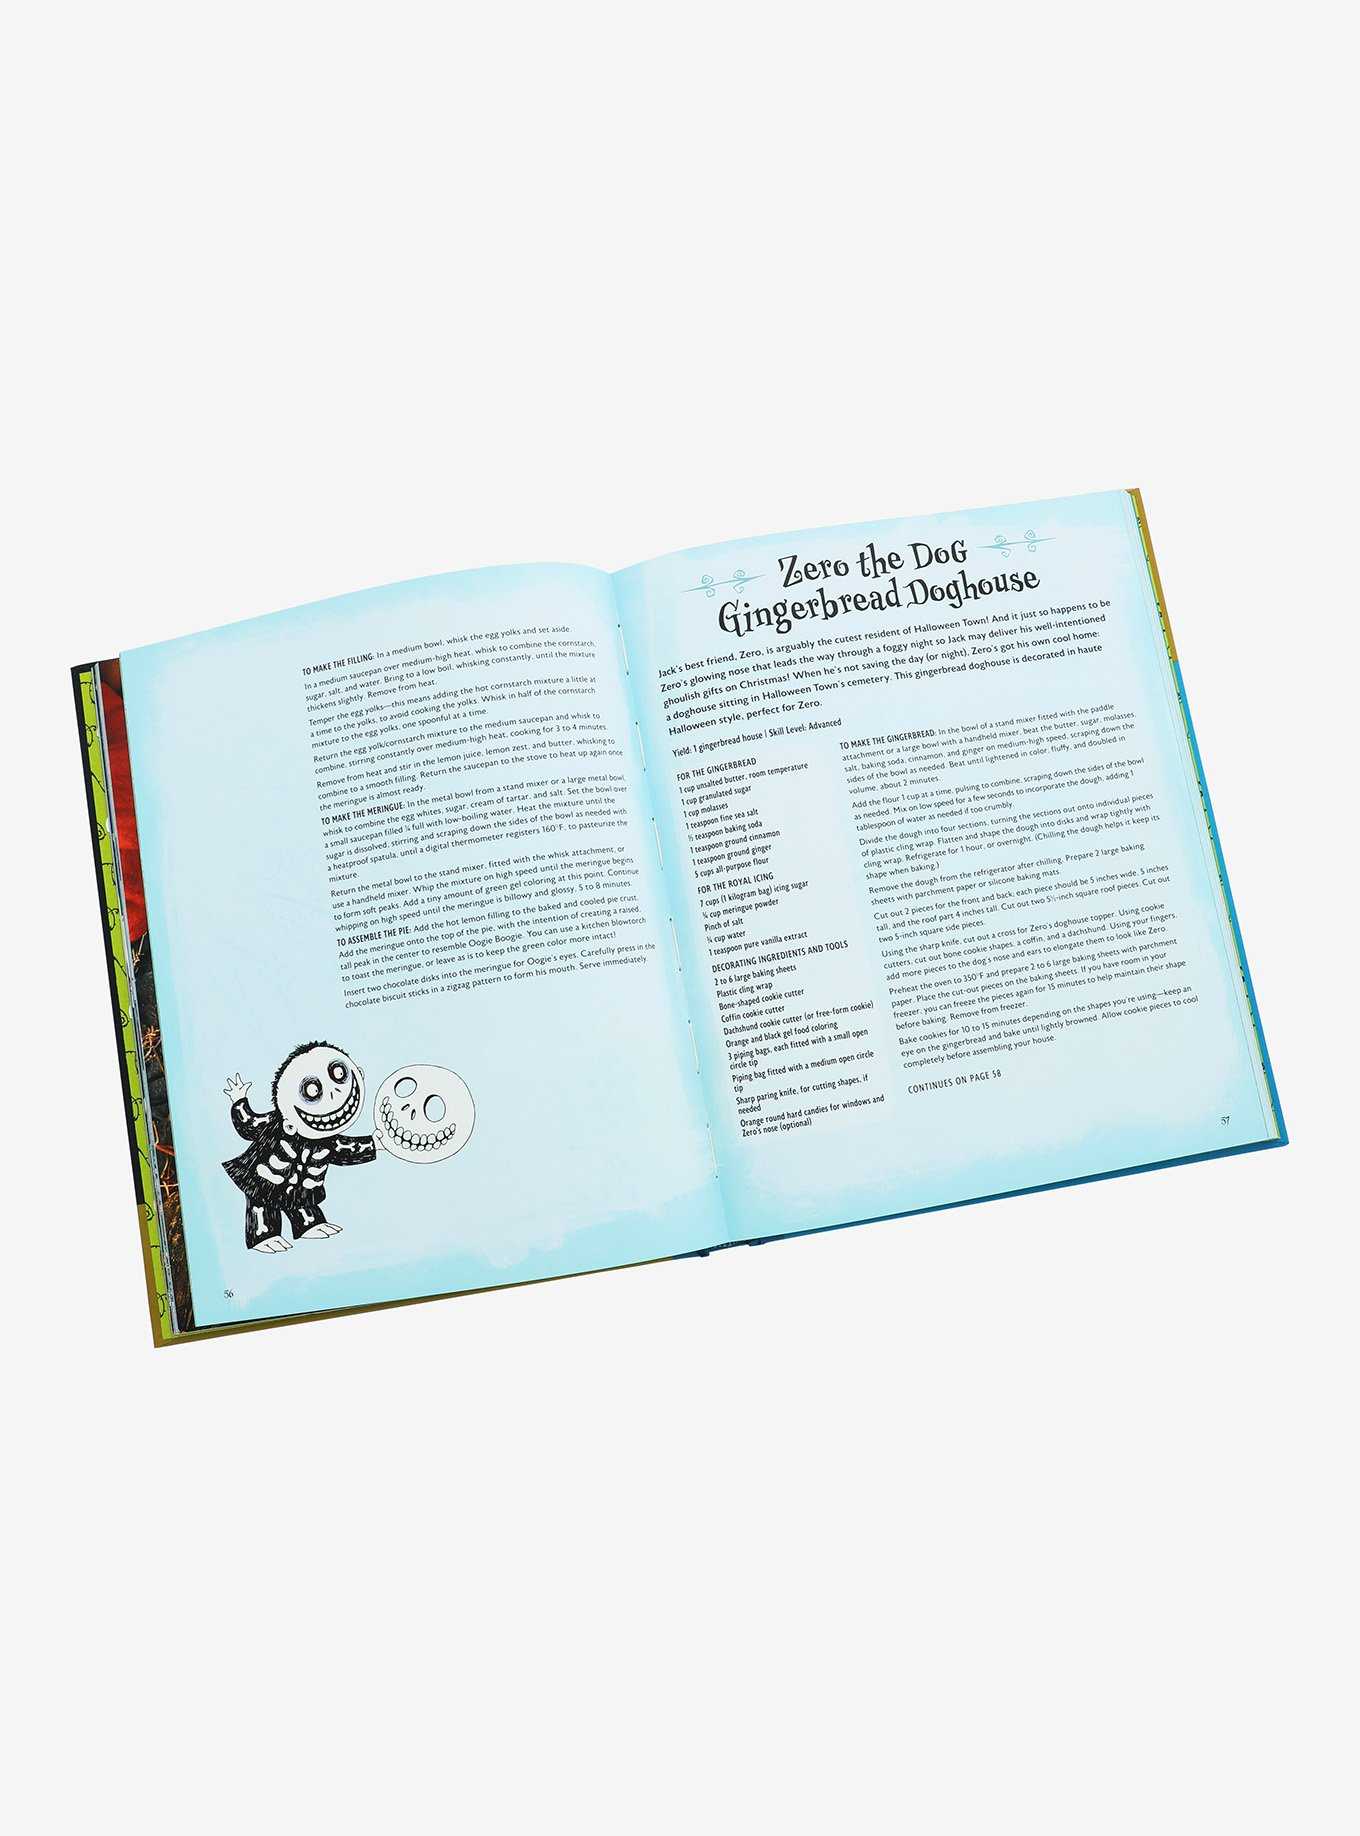 Disney The Nightmare Before Christmas: The Official Baking Cookbook, , hi-res